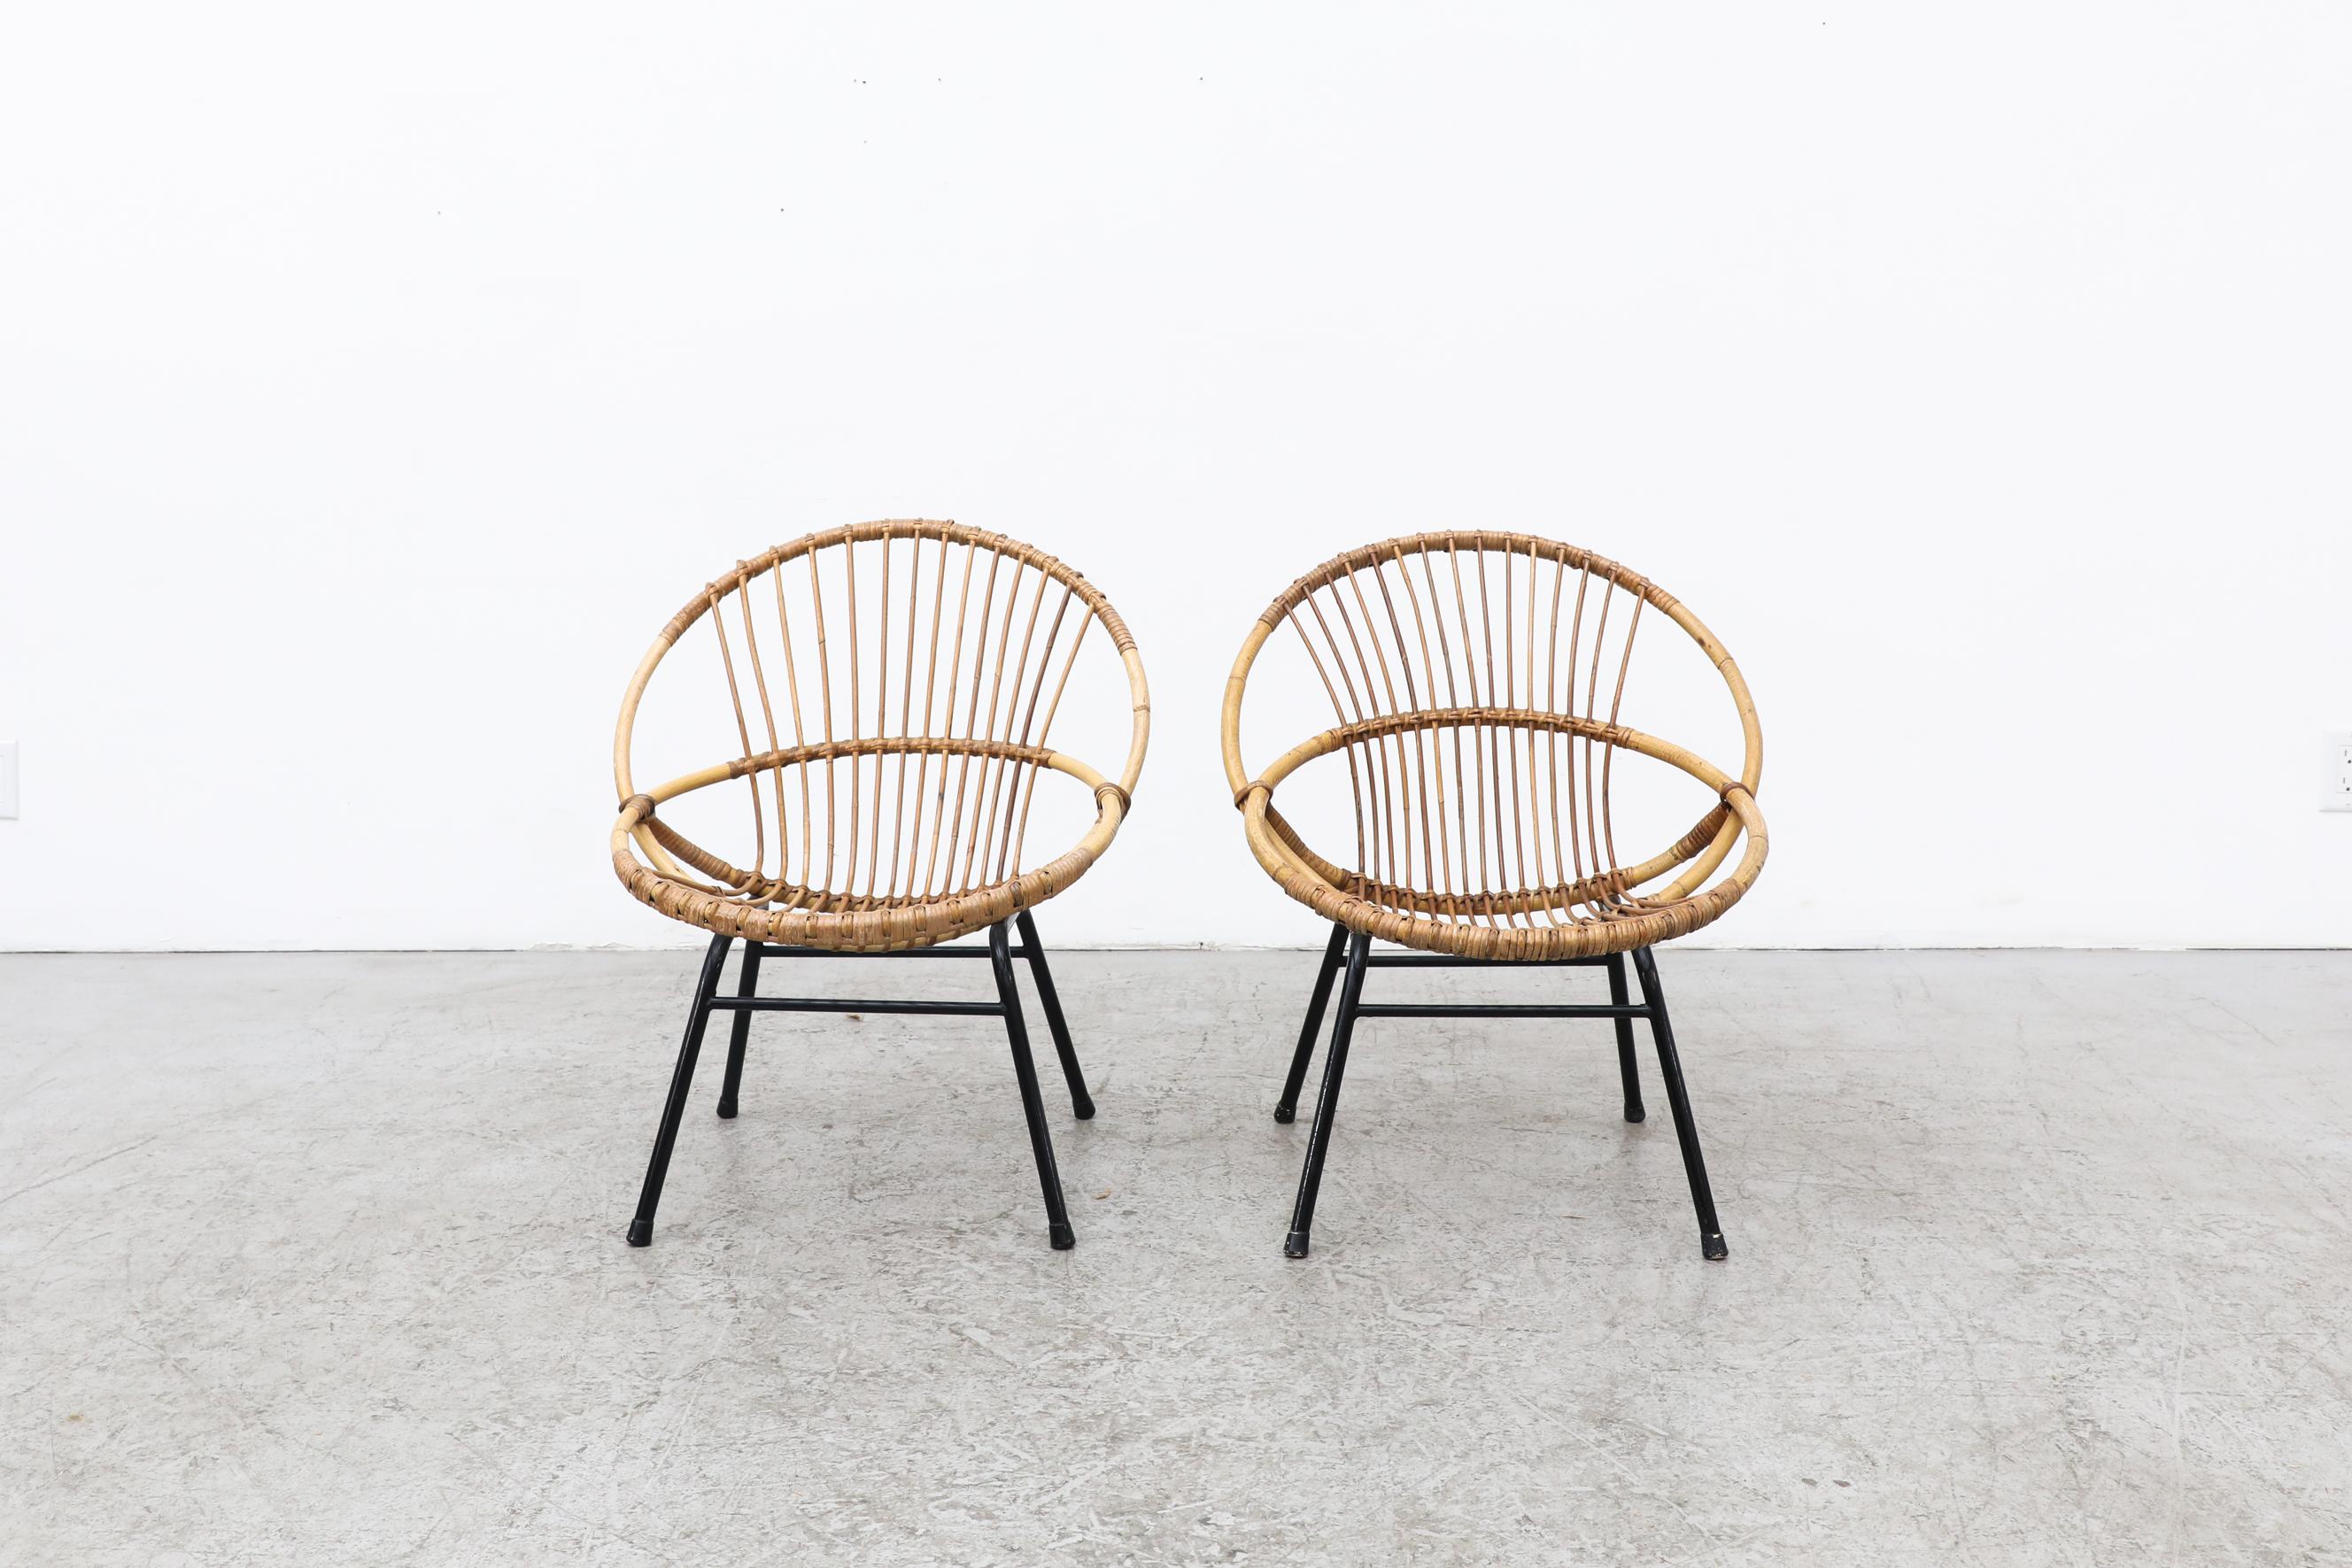 Pair of Rohe Noordwolde bamboo hoop chairs with black enameled metal frames. In original condition with visible wear and patina, and minimal bamboo breakage. Wear is consistent with their age and use. Shown with bamboo side table (LU922432506772).